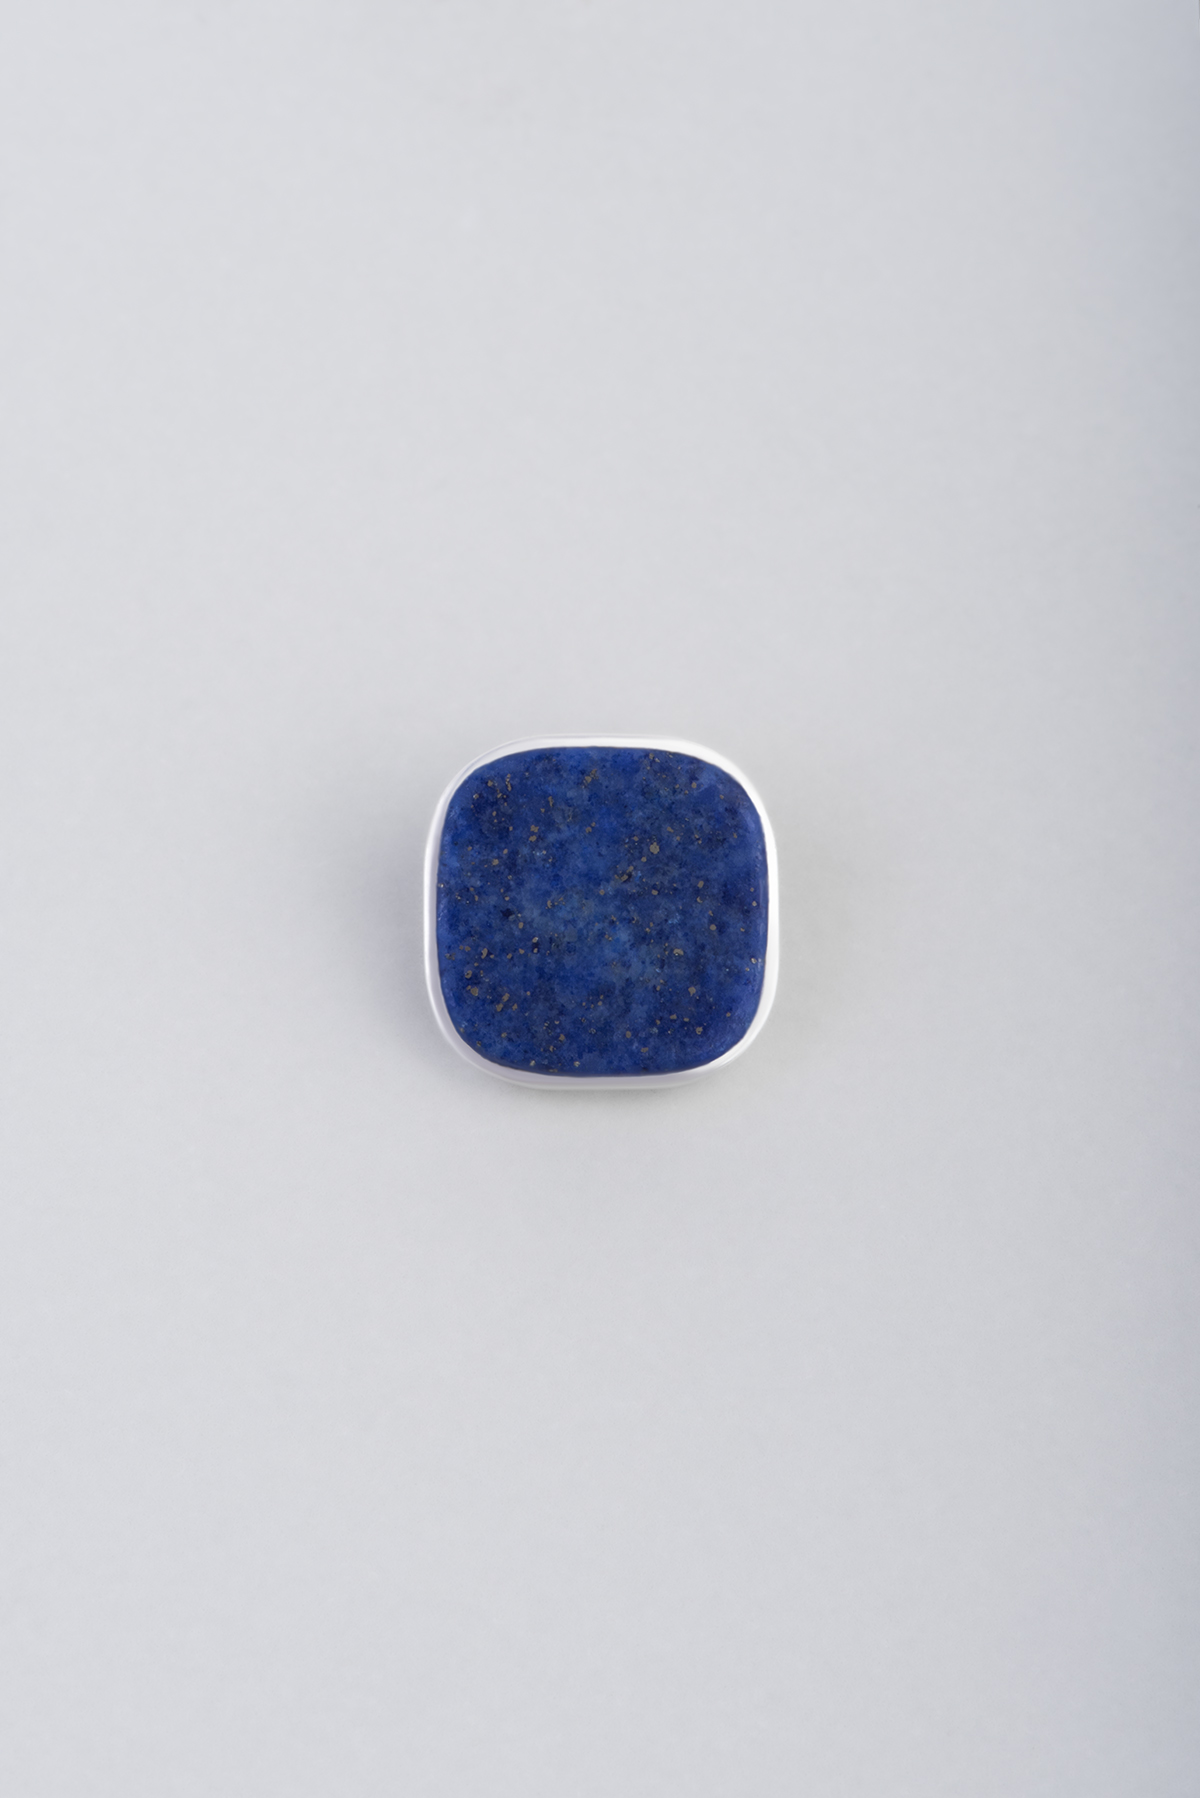  Modify Collection Silver Ring Piece with Lapis Lazuli Gemstone